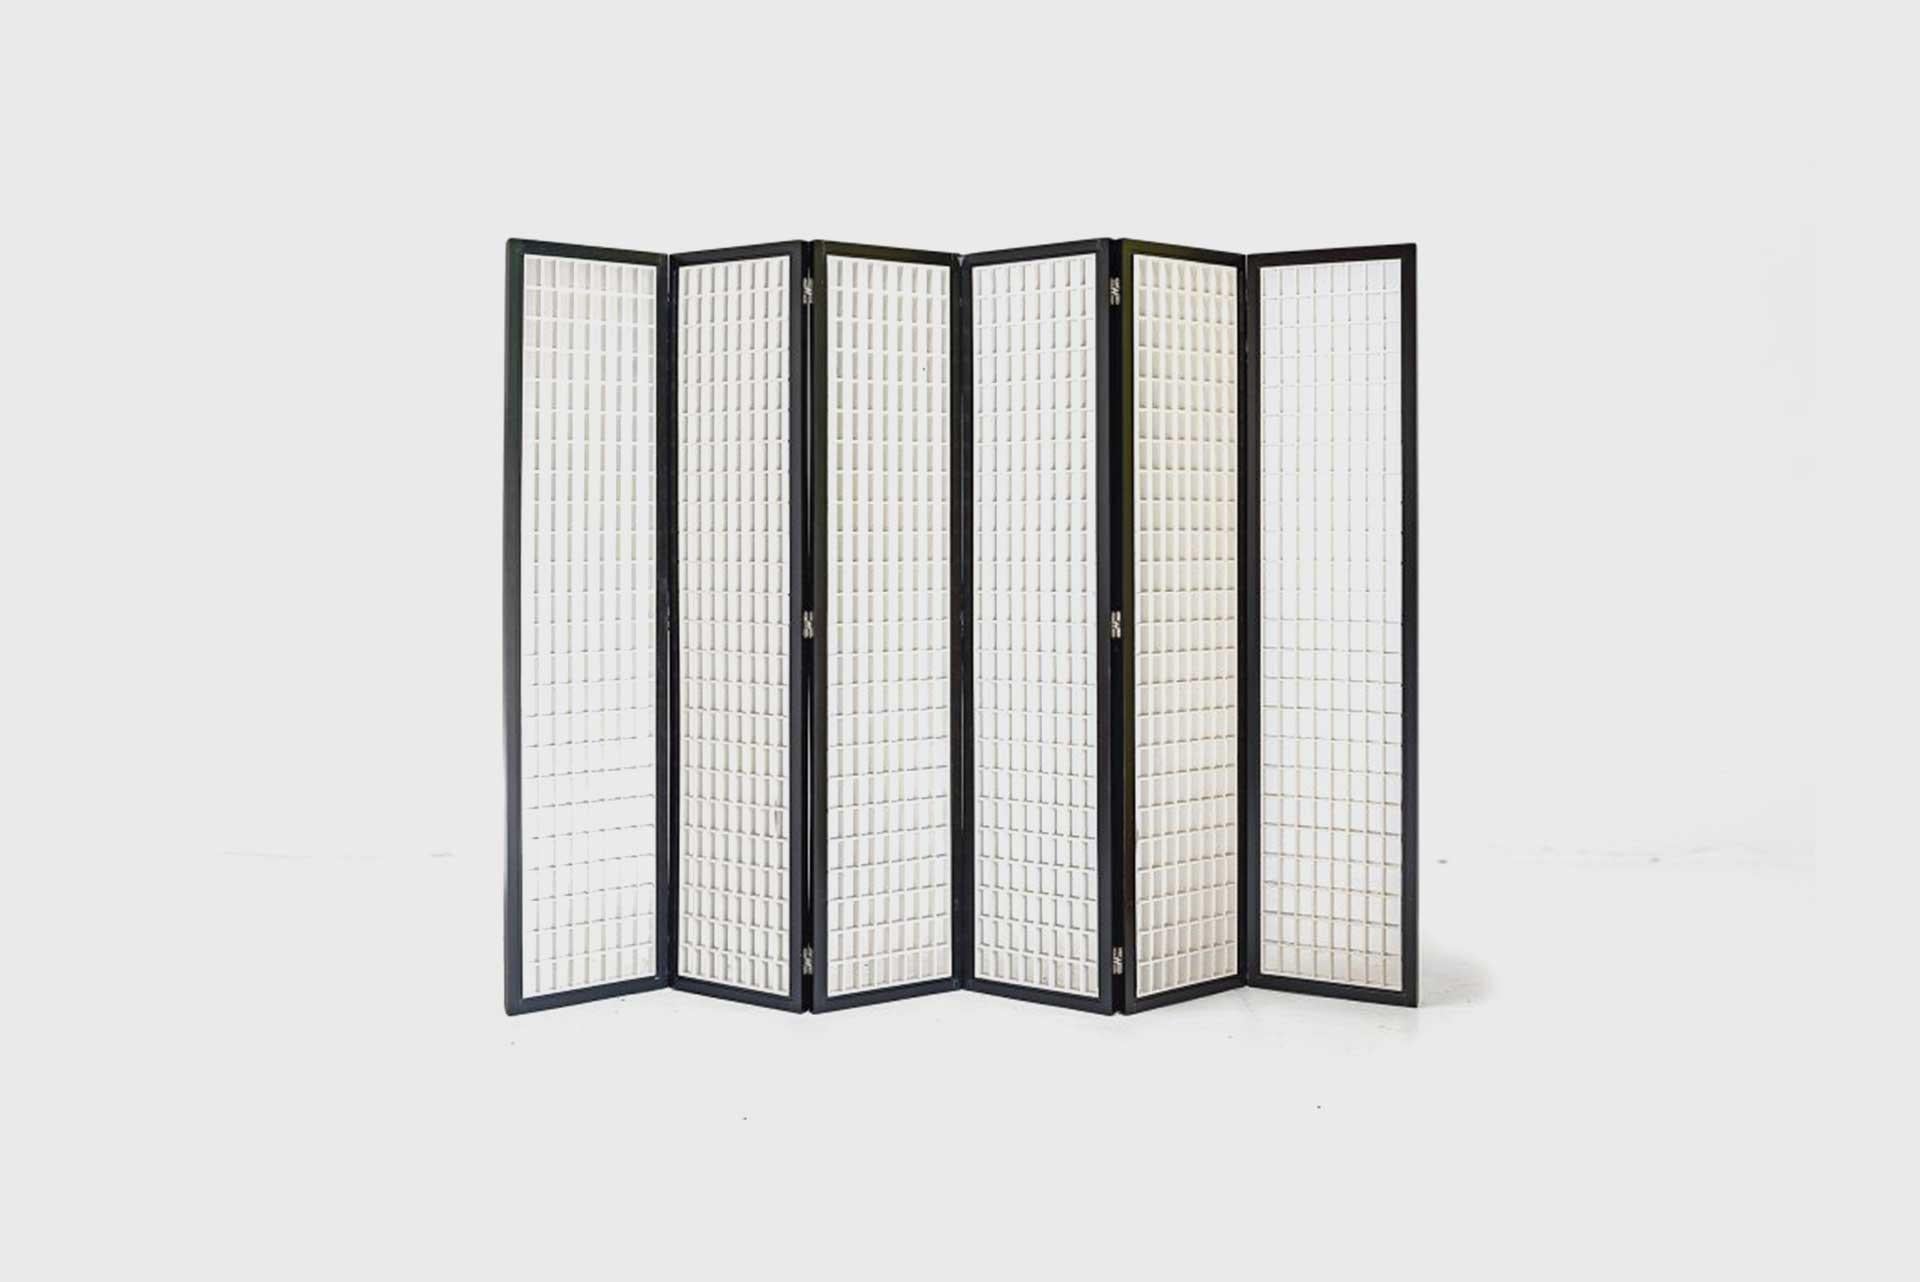 Room Divider
Manufactured by Tenreiro Moveis e Decoraçoes
Brazil, 1960
Black and white painted jacaranda

Measurements
280 cm x 3,5 cm x 201,2h cm
110,23 in in x 1,37 in x 71,29h in

Provenance
Jockey club in Rio de Janeiro

Details
Published in the